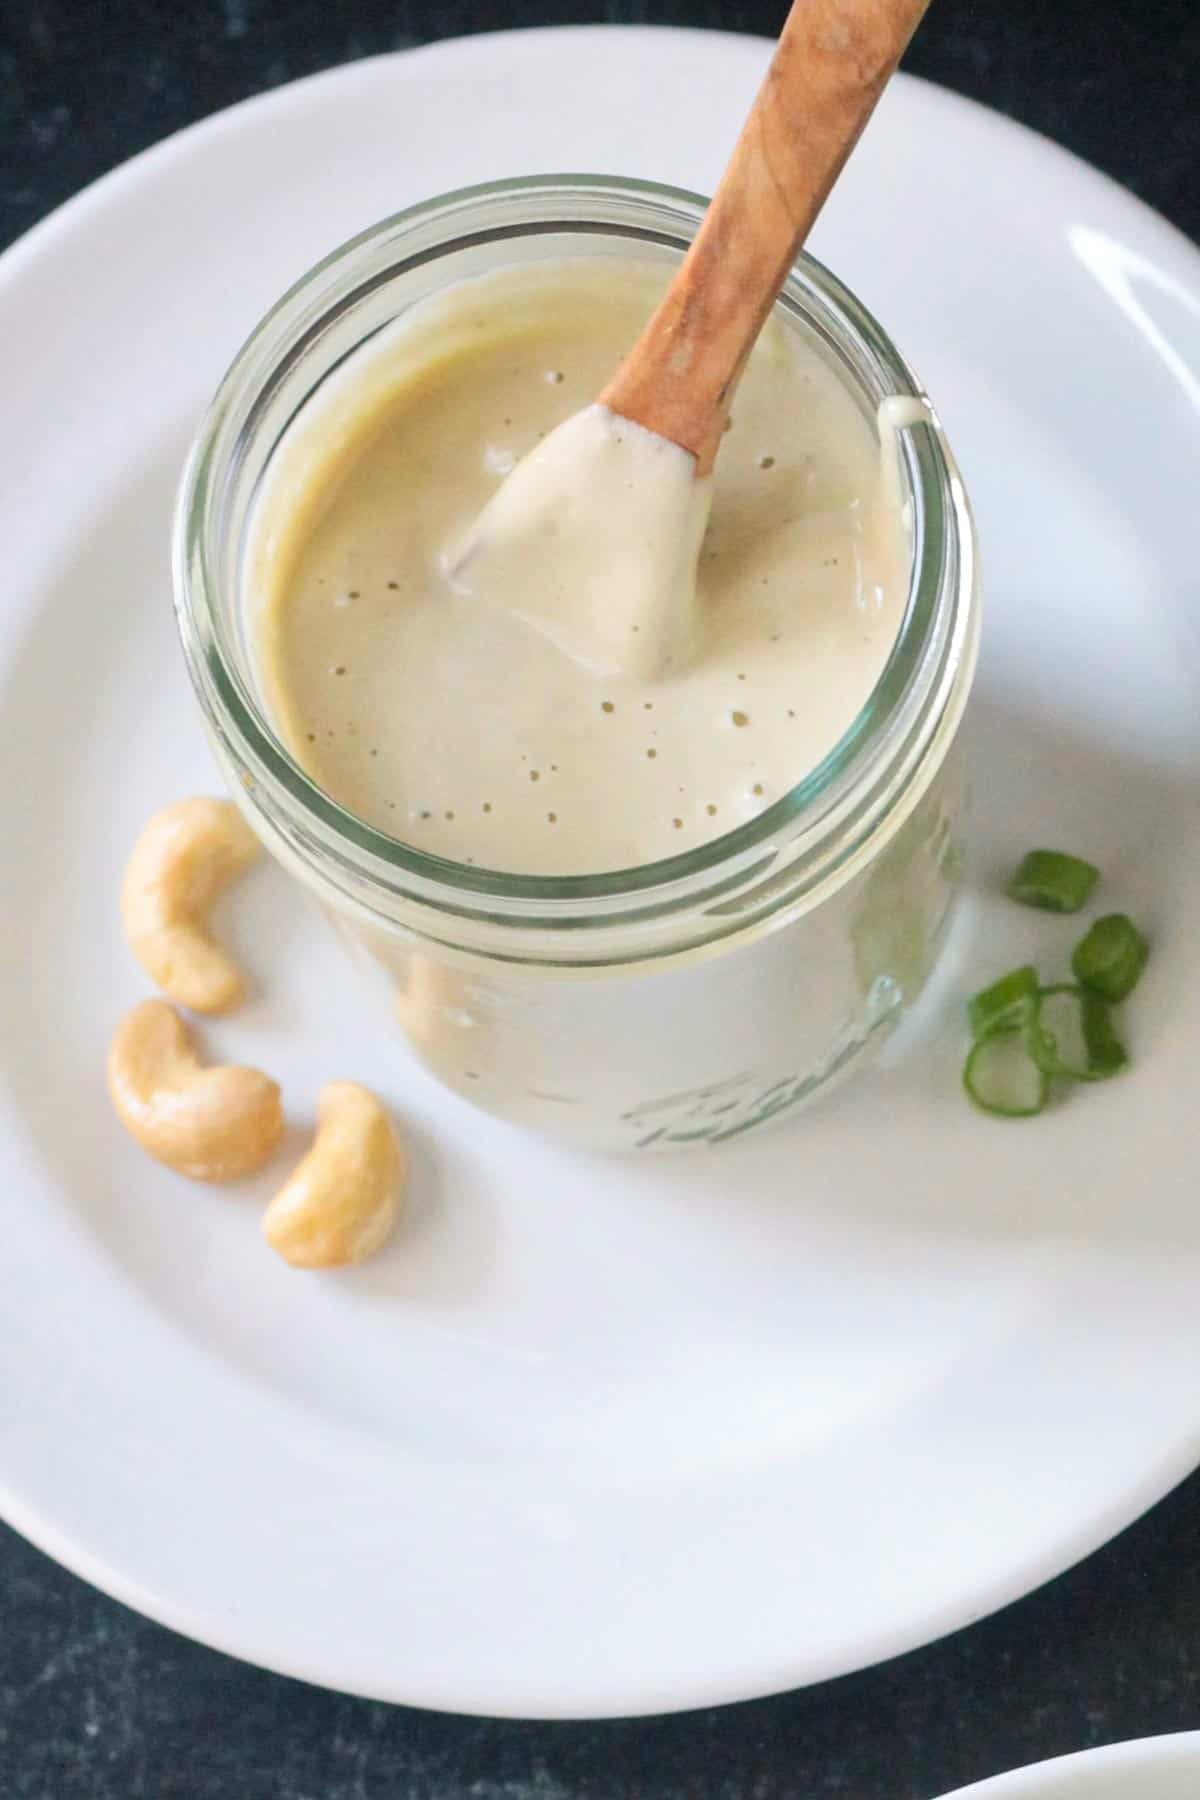 Small wooden spoon in a jar of creamy sesame salad dressing.